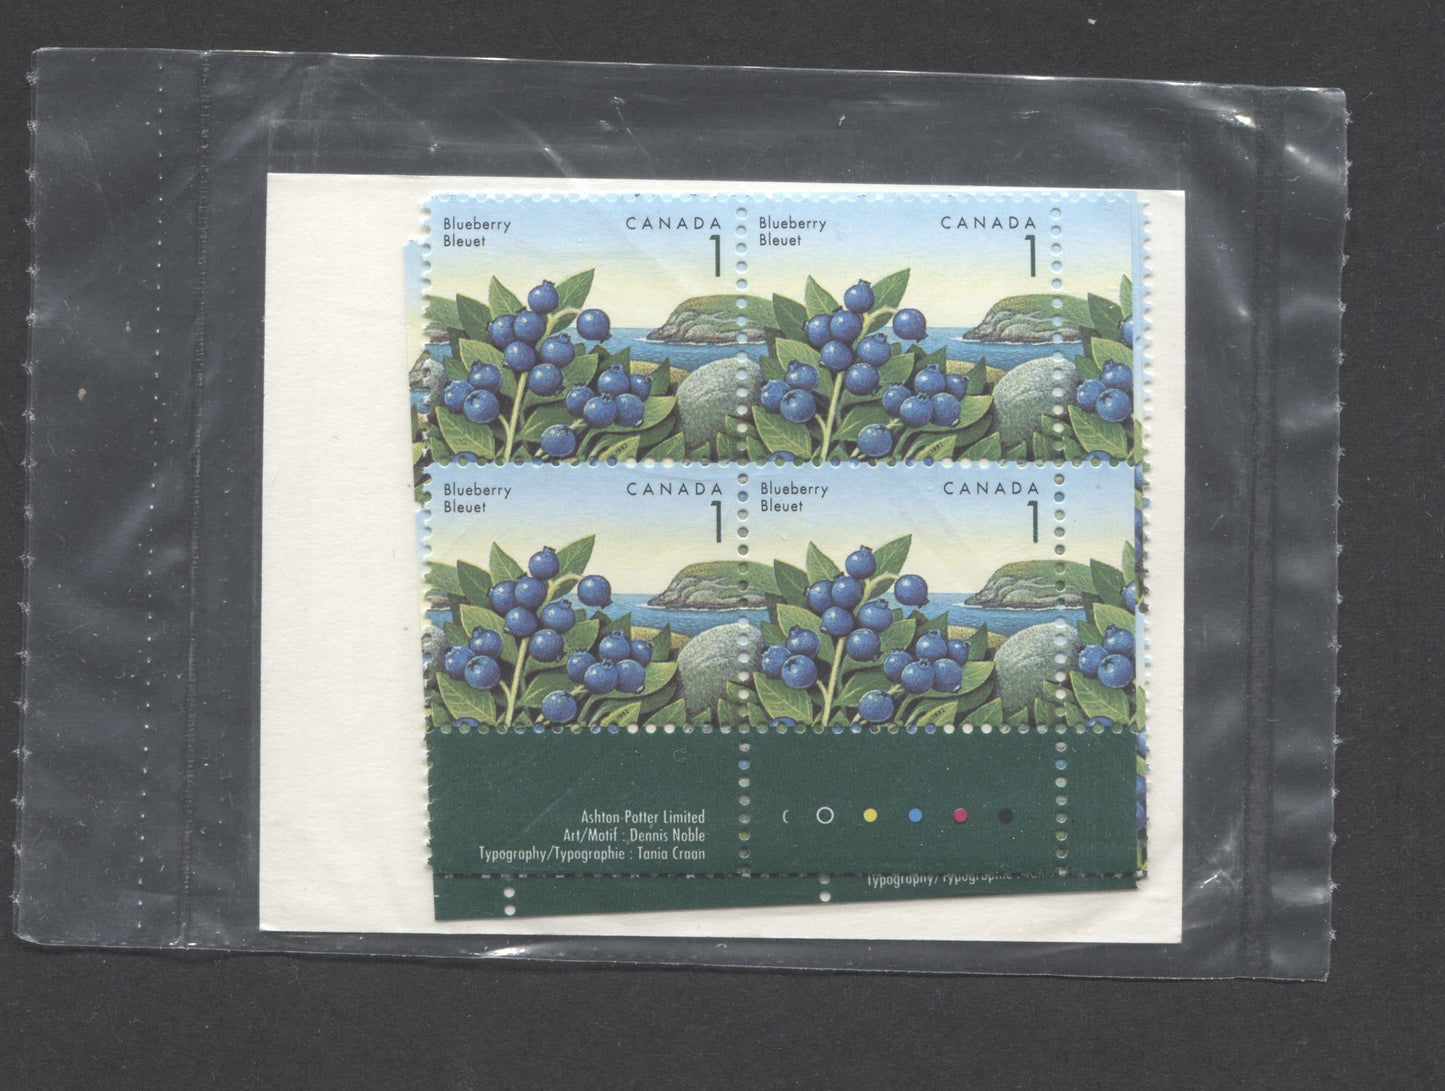 Lot 1 Canada #1349 1c Multicoloured 1992 - 1998 Edible Berries Definitive Issue, Canada Post Sealed Pack of Inscription Blocks, Ashton Potter Canada Printing On DF Coated Paper, With DF Type 5B Insert Card, VFNH, Unitrade Cat. $13.75